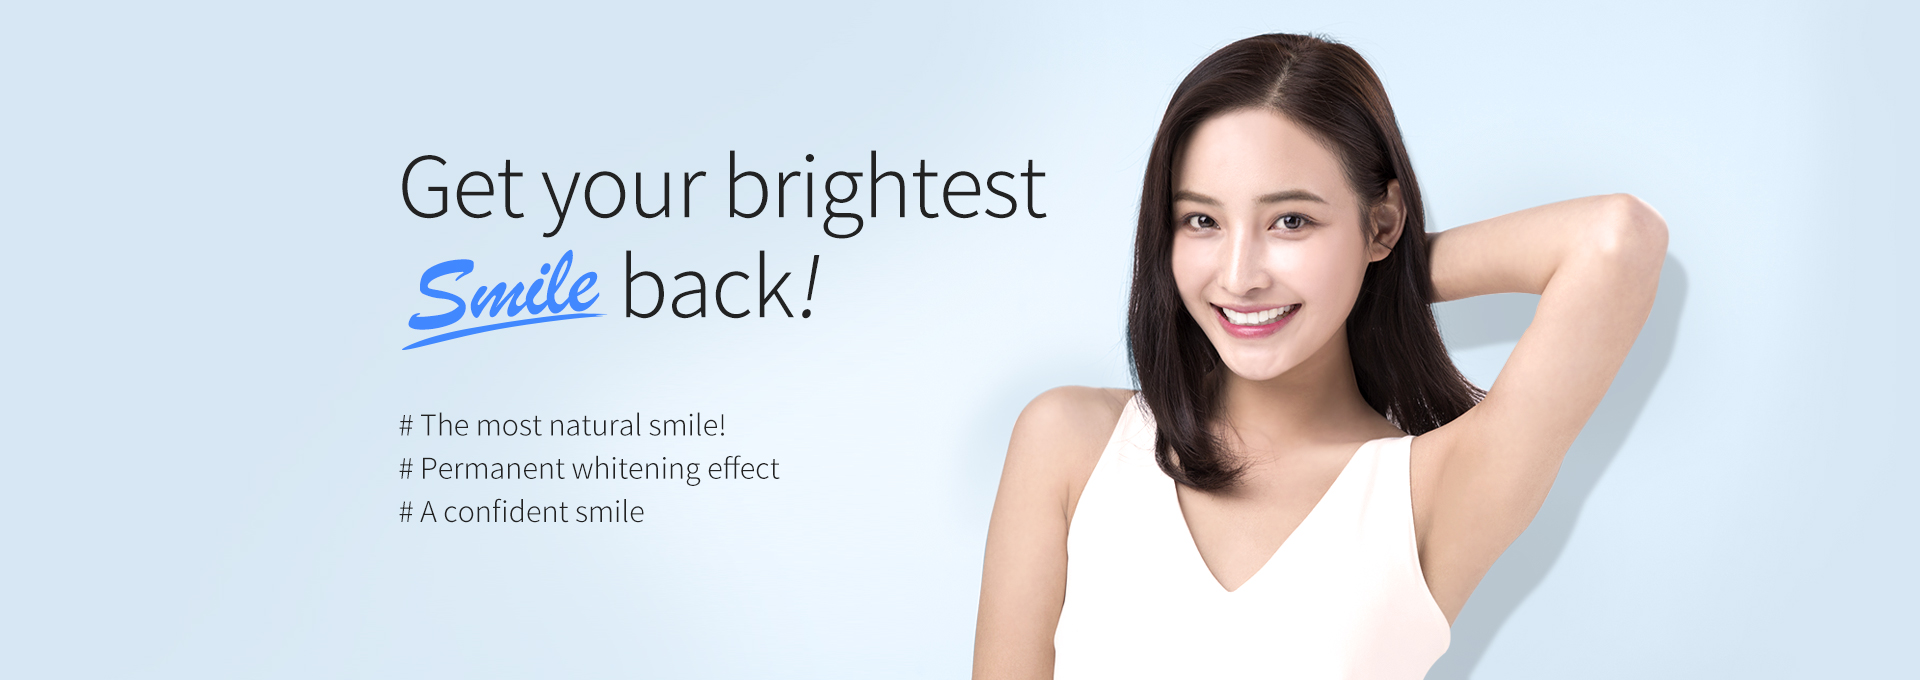 Get your brightest smile back! class=